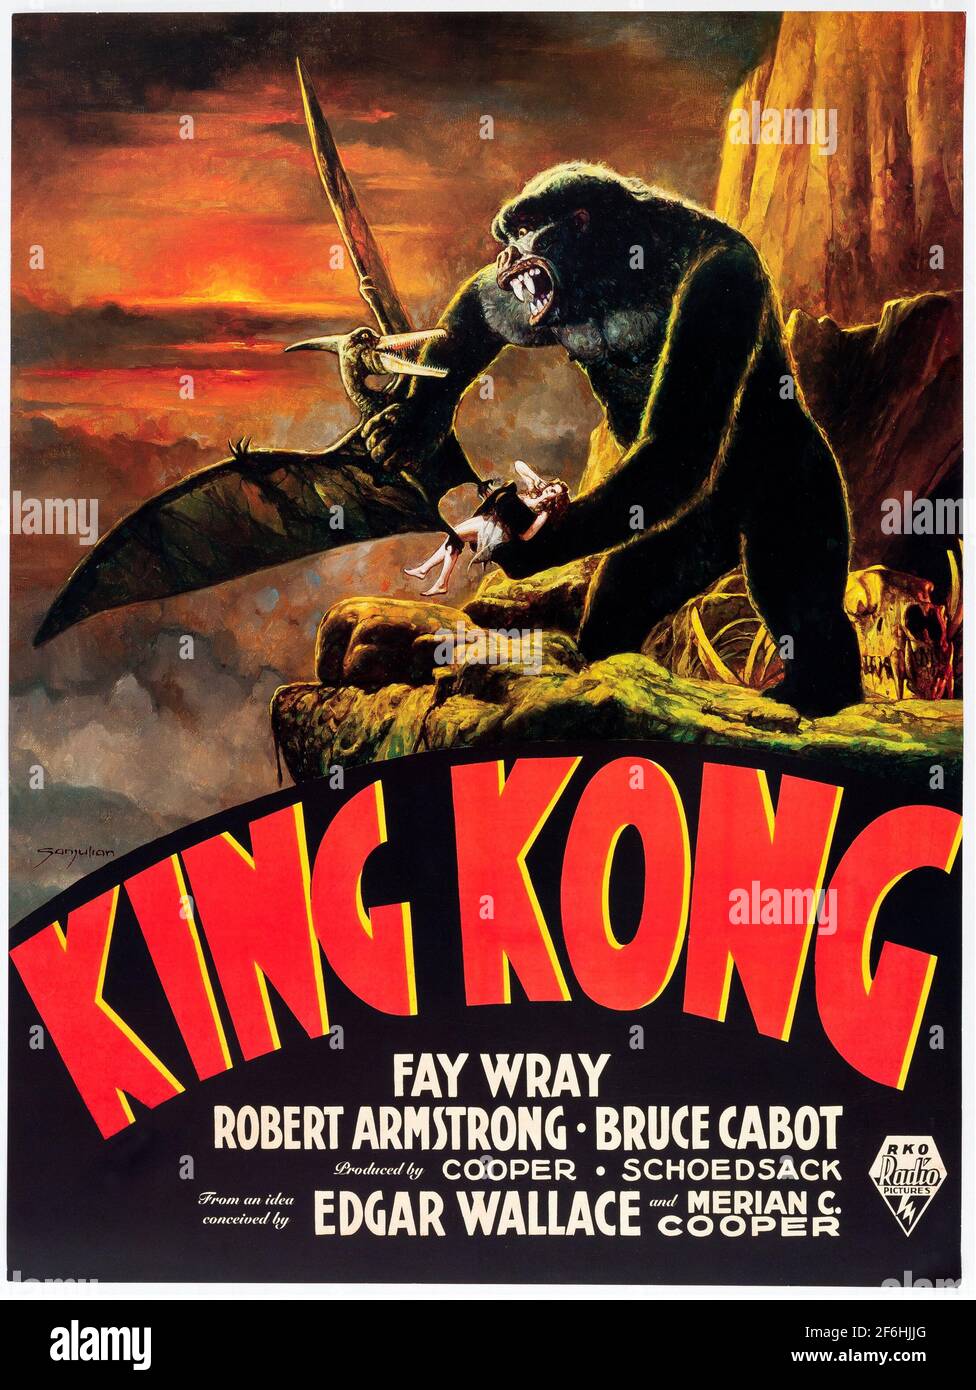 King Kong, movie poster 1933. Featuring Fay Wray, Bruce Cabot, Robert Armstrong, Frank Reicher. Adventure / Fantasy / Action / Romance. French version Stock Photo